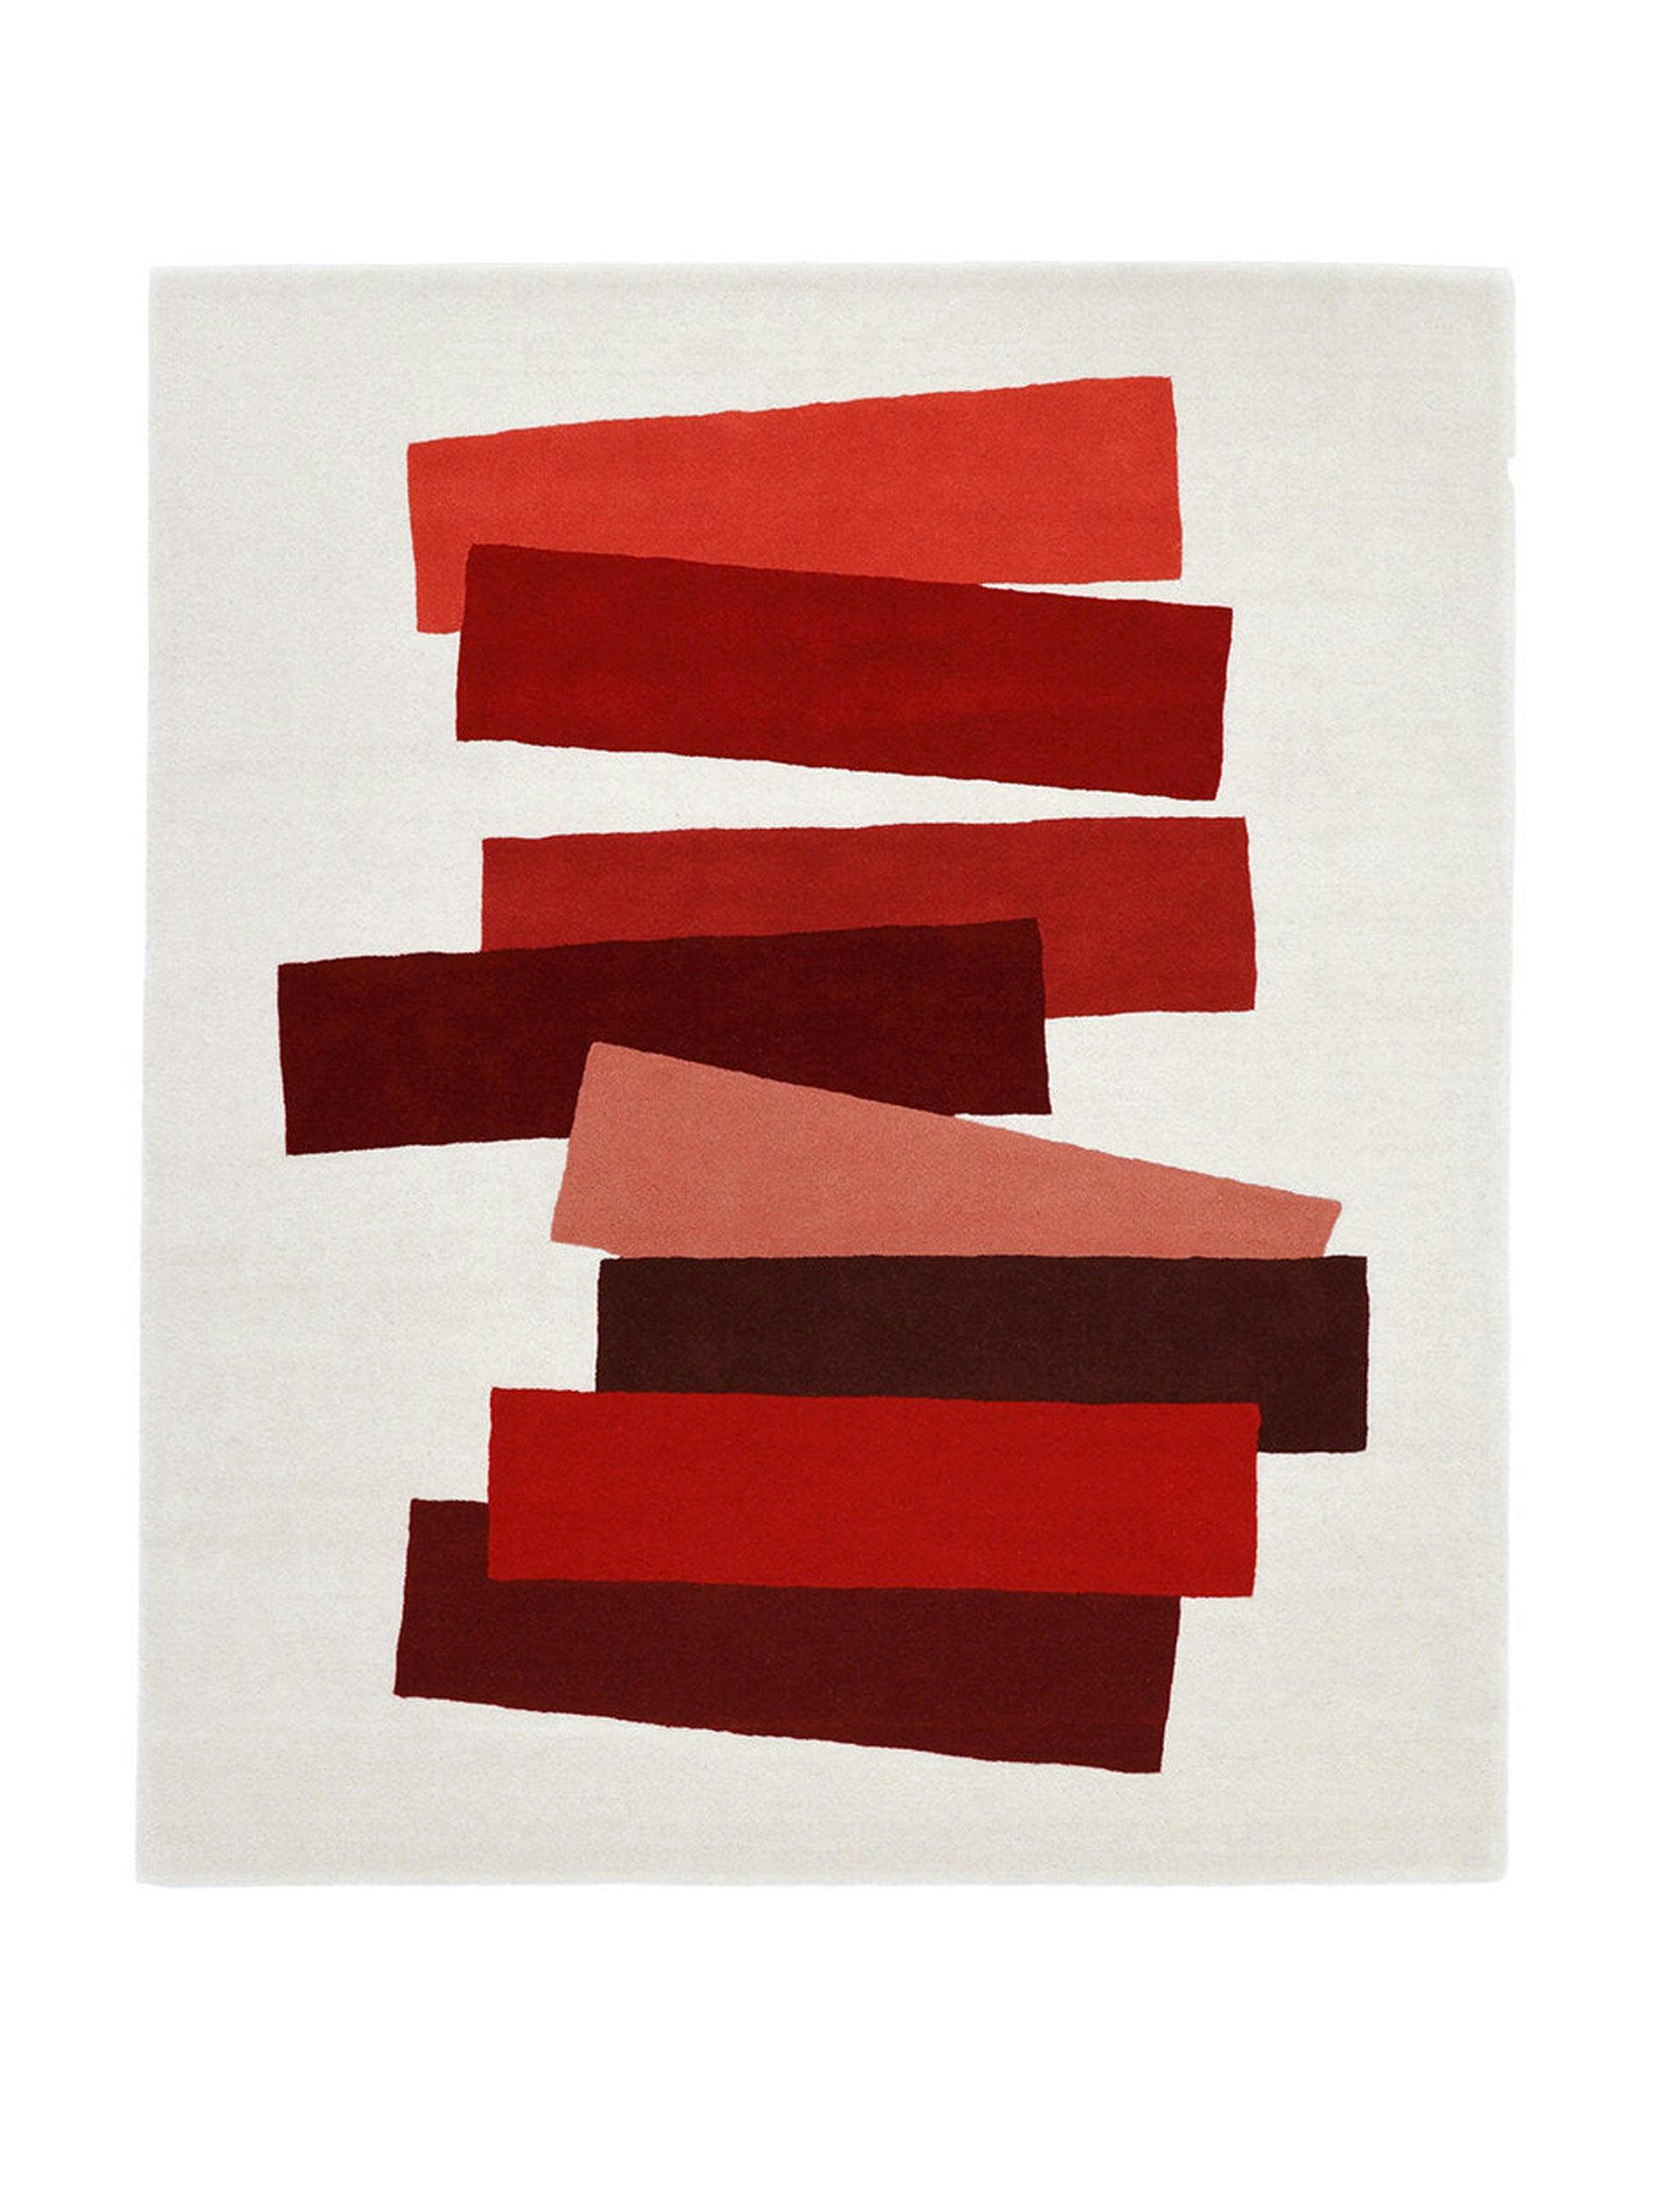 The Many Faces of Red by Josef Albers' woollen rug